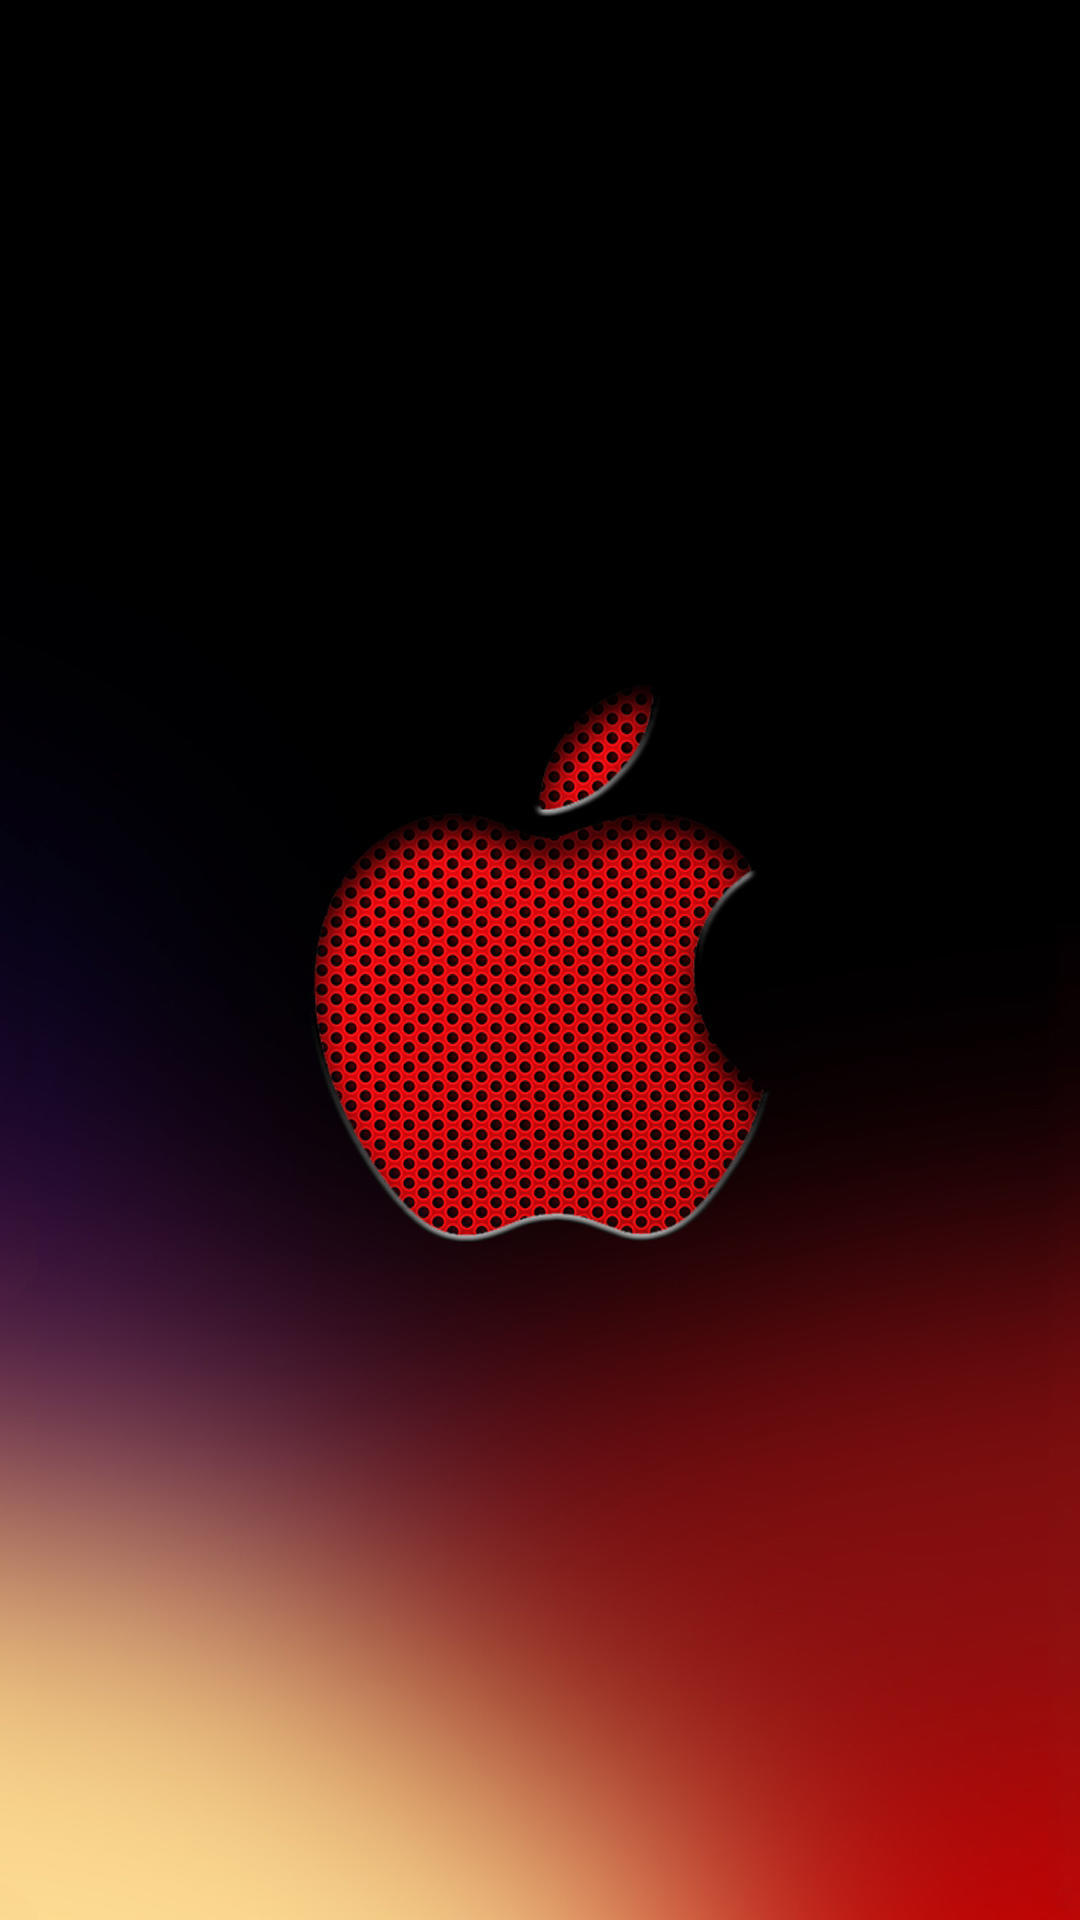 Iphone 7 Red Apple - HD Wallpaper 